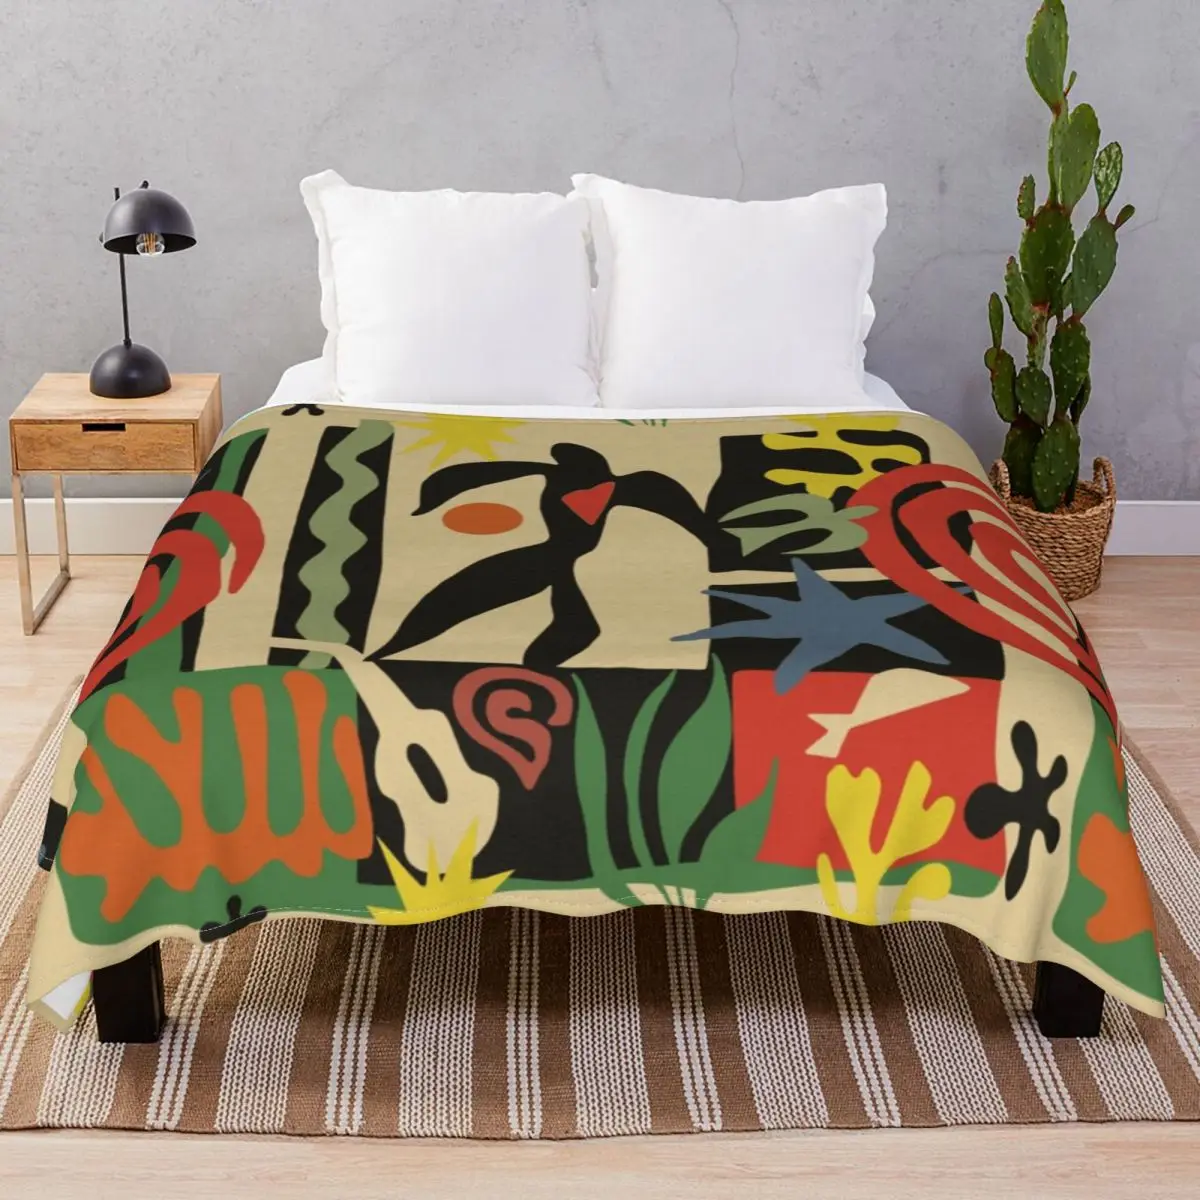 Inspired By Matisse Vintage Blanket Flannel Spring/Autumn Lightweight Thin Throw Blankets for Bed Sofa Travel Office